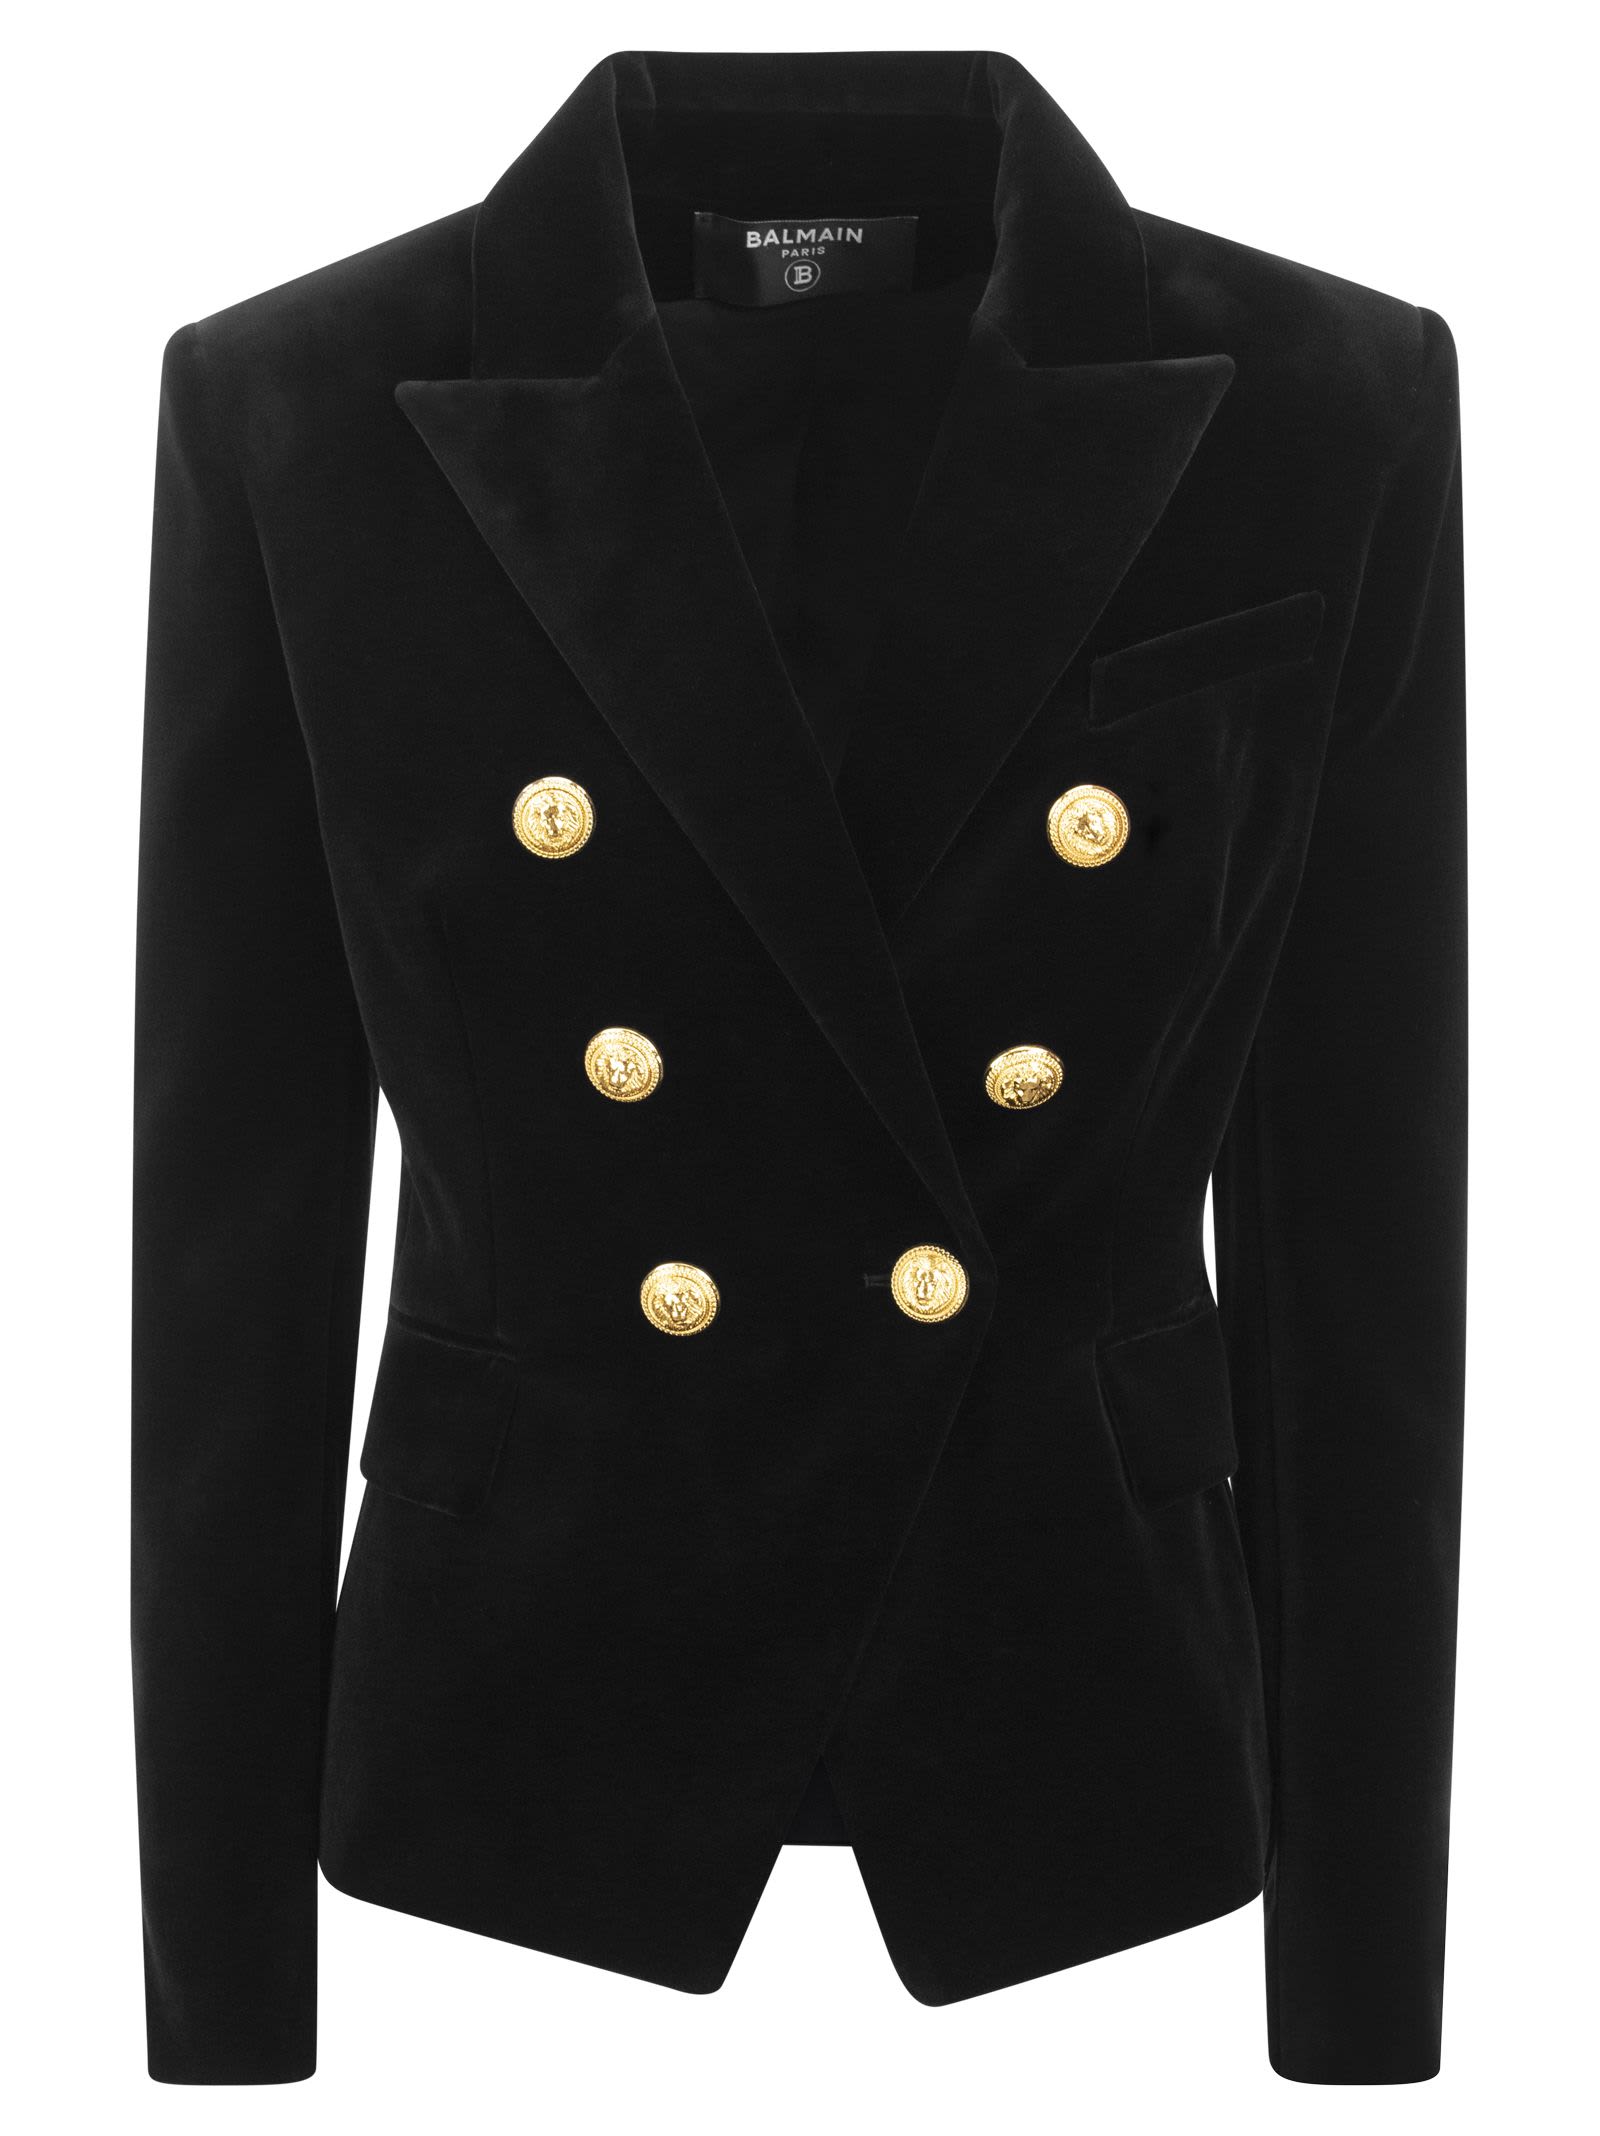 Balmain Black Velvet Double-breasted Blazer With Gold Buttons